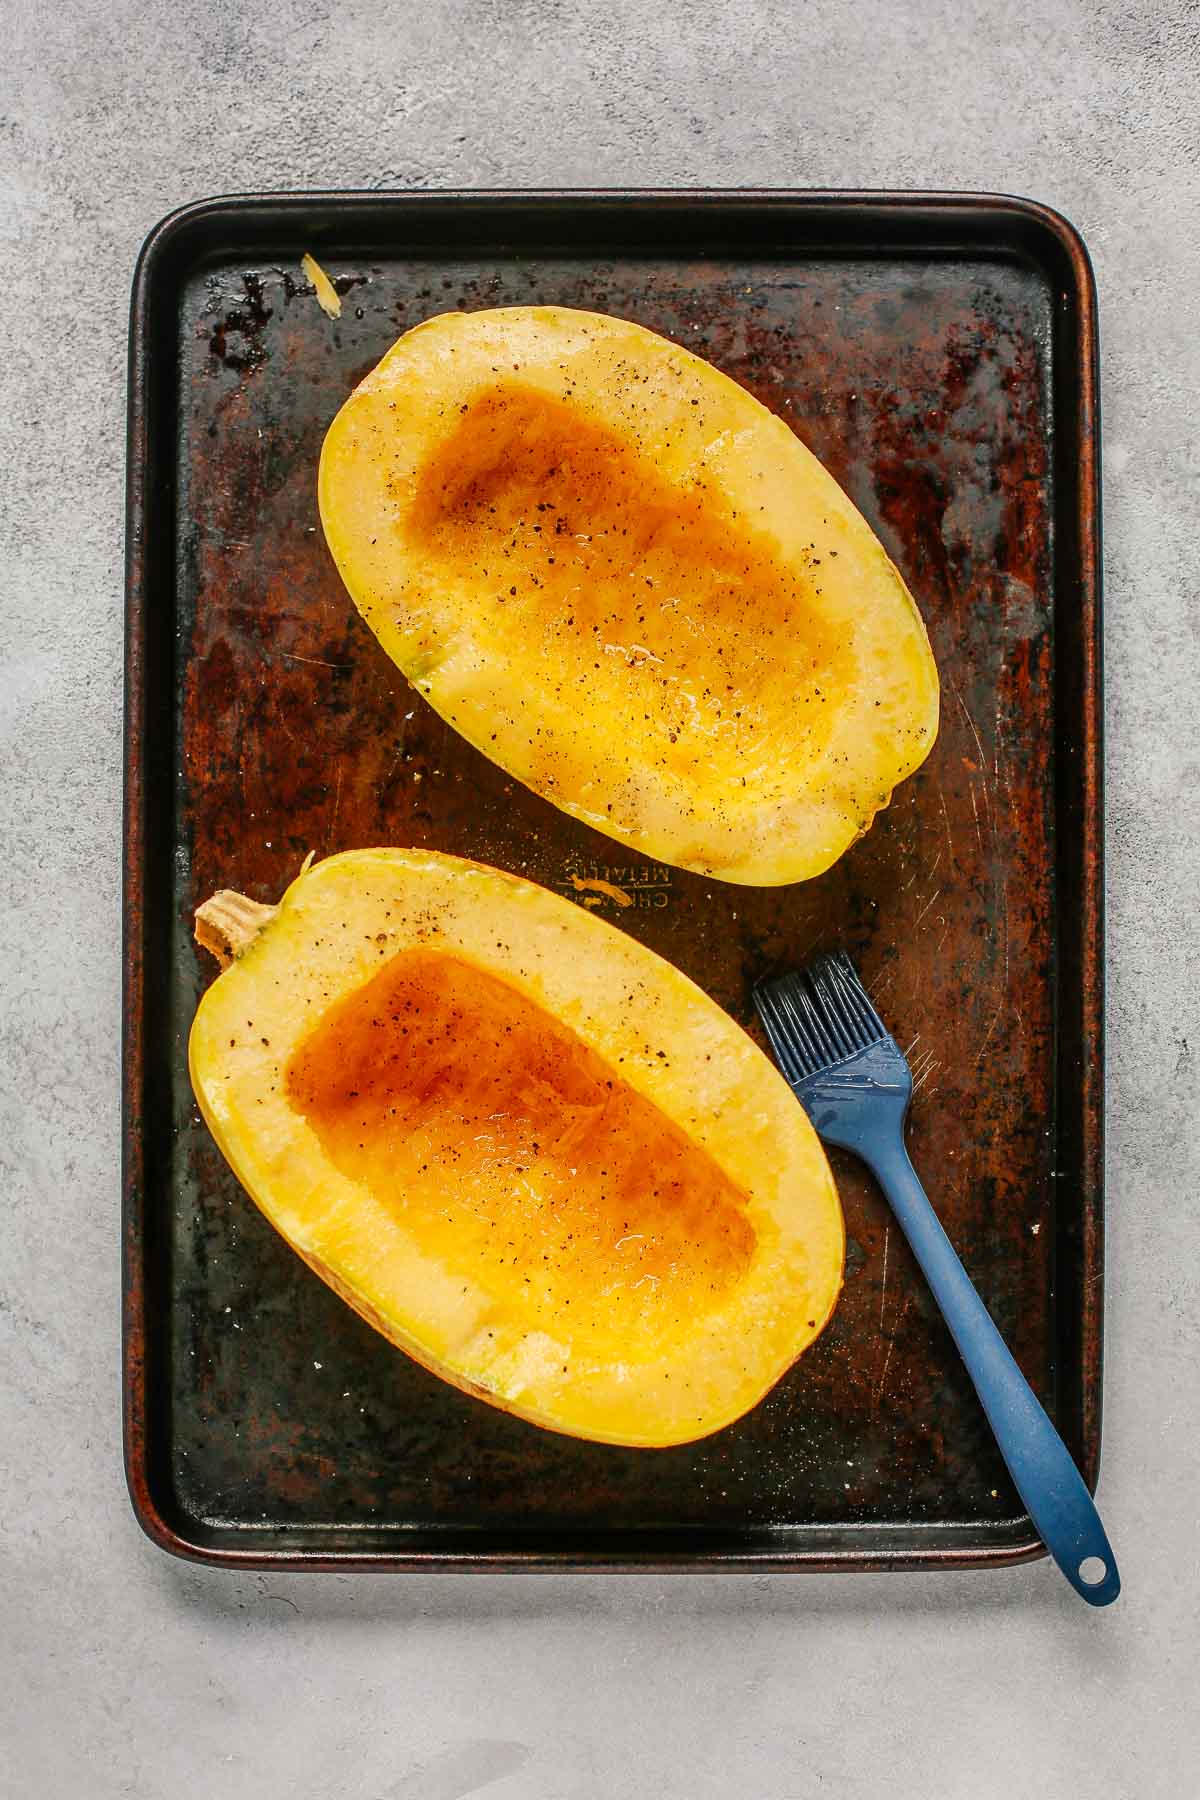 spaghetti squash cut in half without seeds and with olive oil, salt and pepper